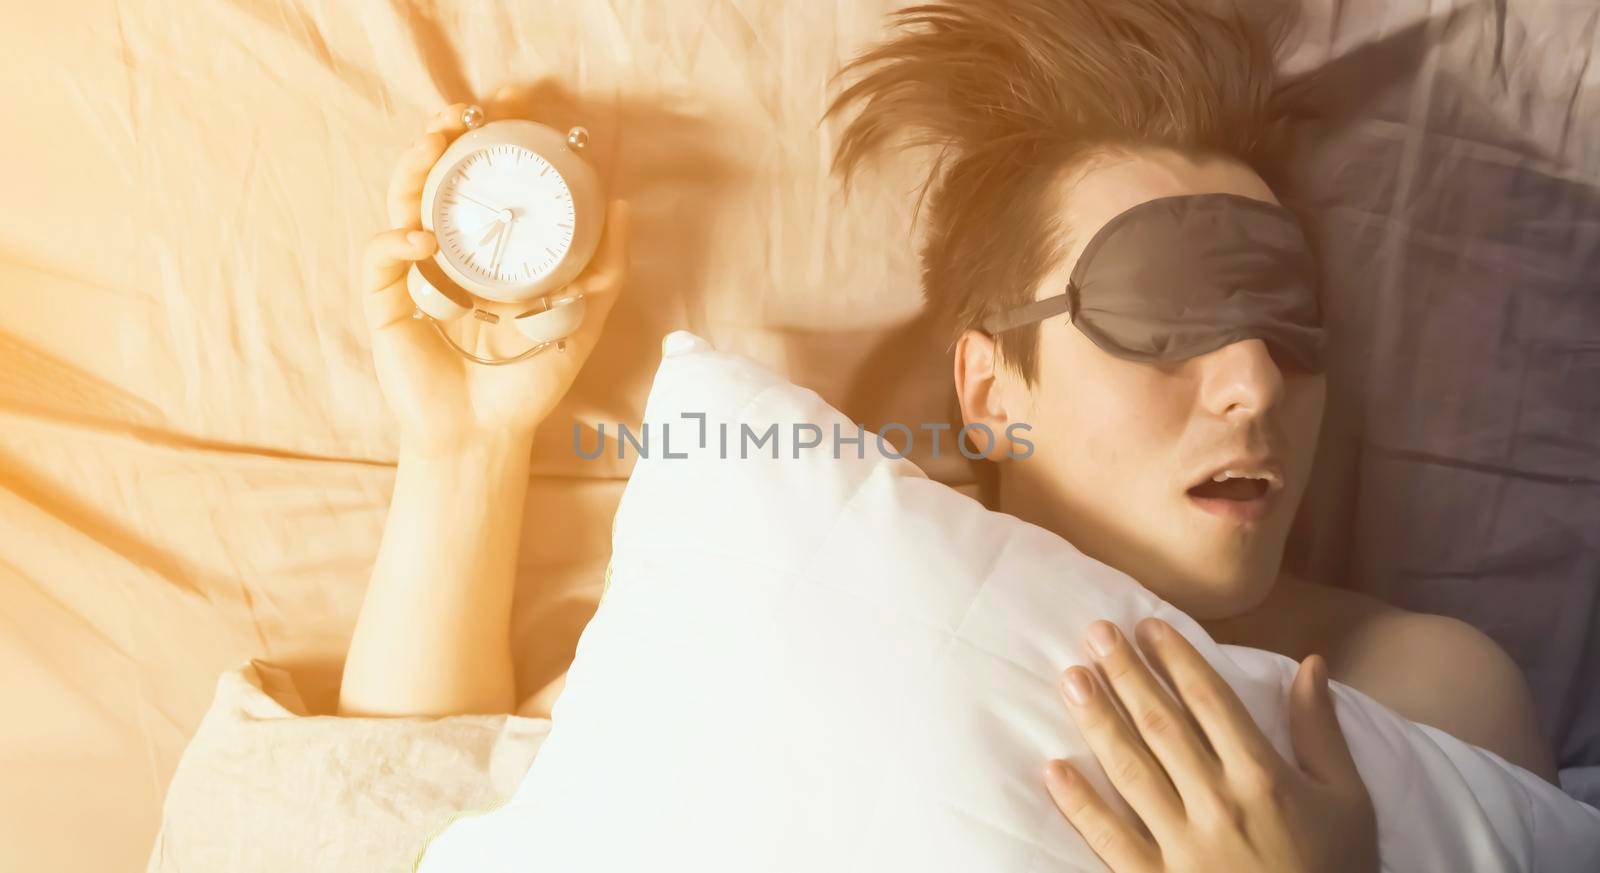 A young funny man sleeps soundly early in the morning, hugs a pillow and holds a vintage alarm clock in his hands, the sleep mask has slipped from his eyes.